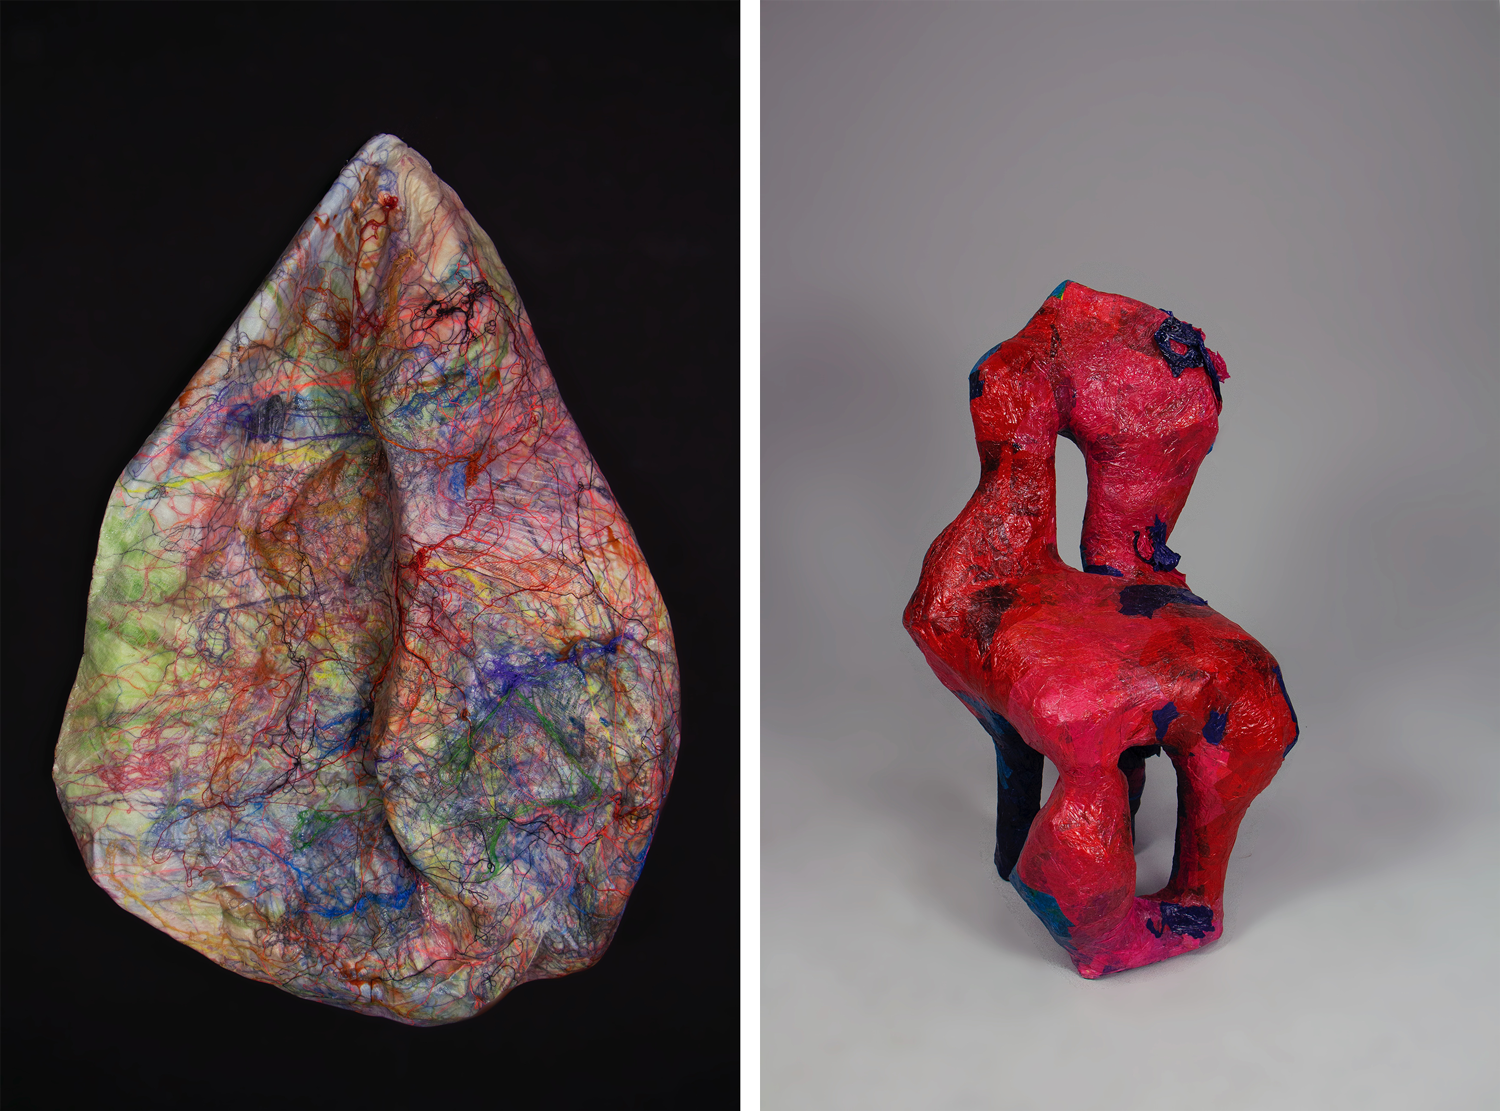 Two pieces by Lydia: left, a colorful abstract sculpture; right, an abstract shaped chair